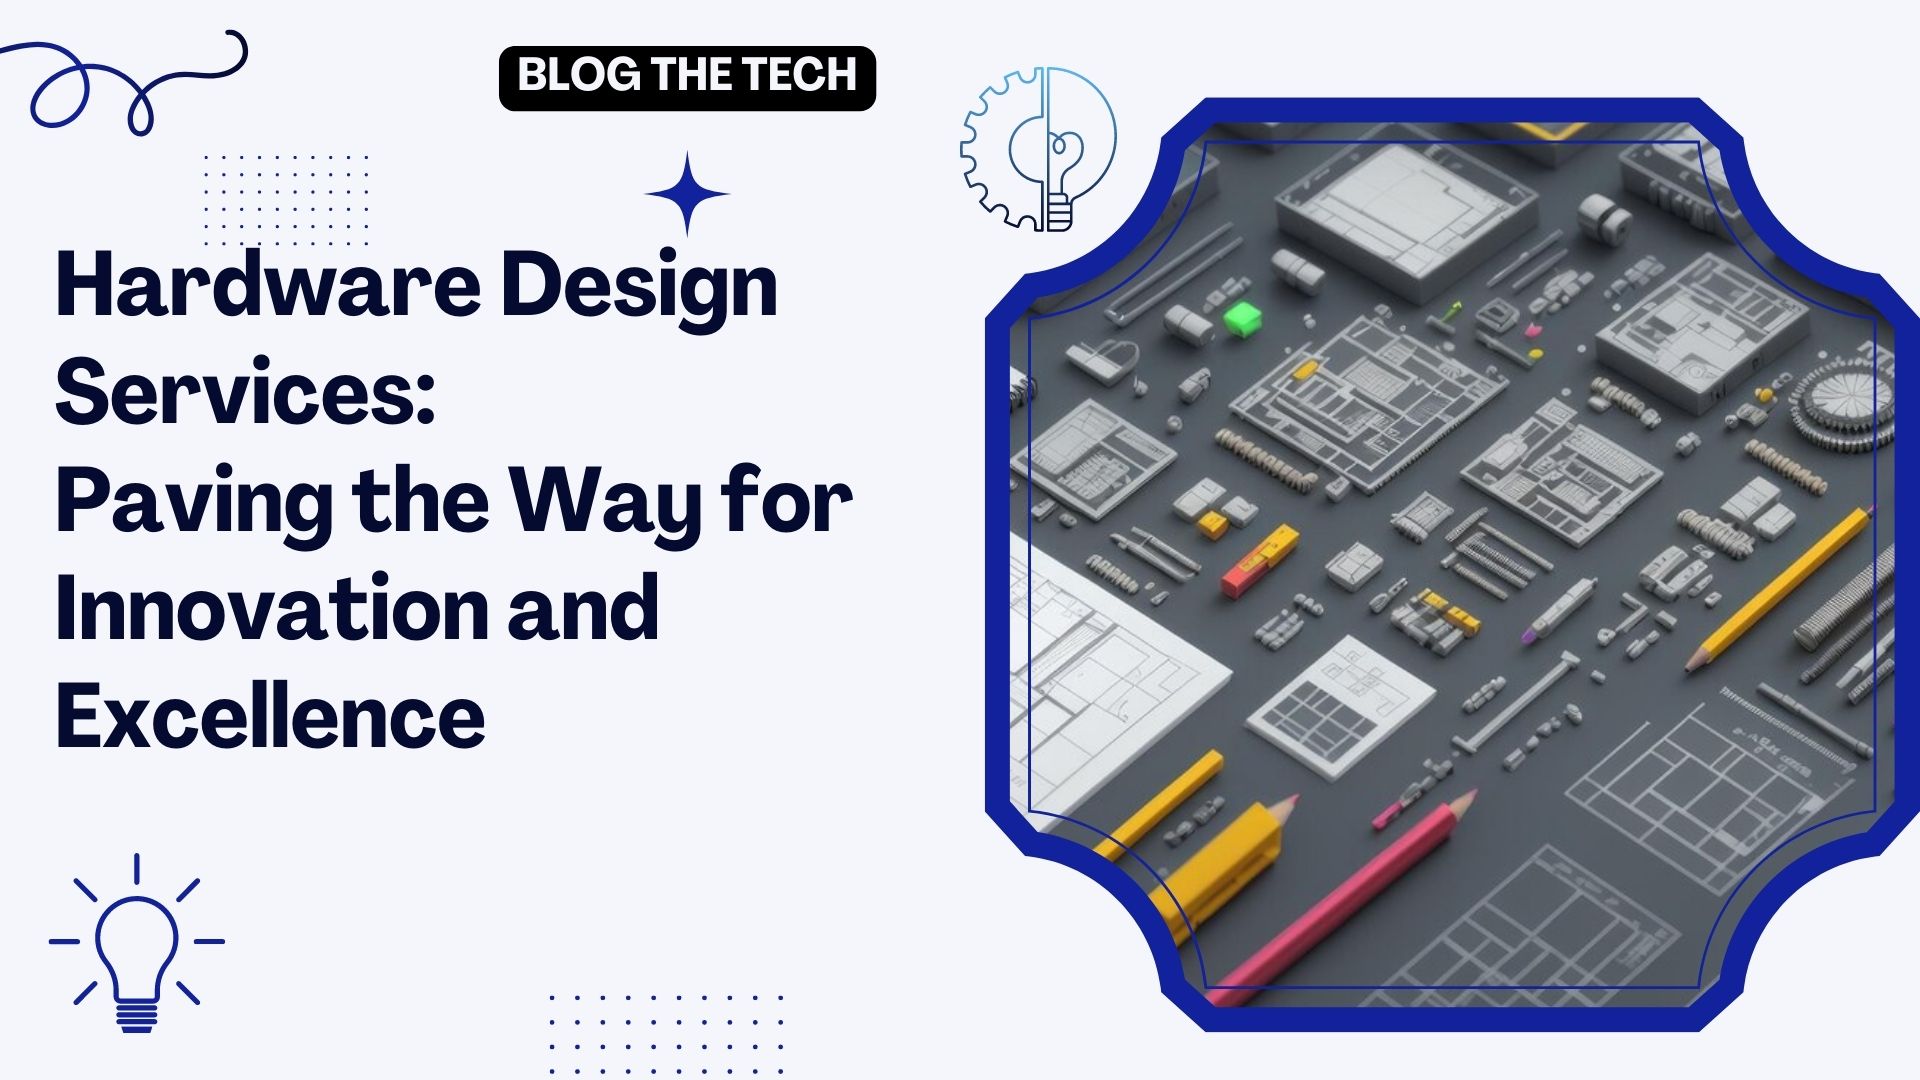 Hardware Design Services: Paving the Way for Innovation and Excellence